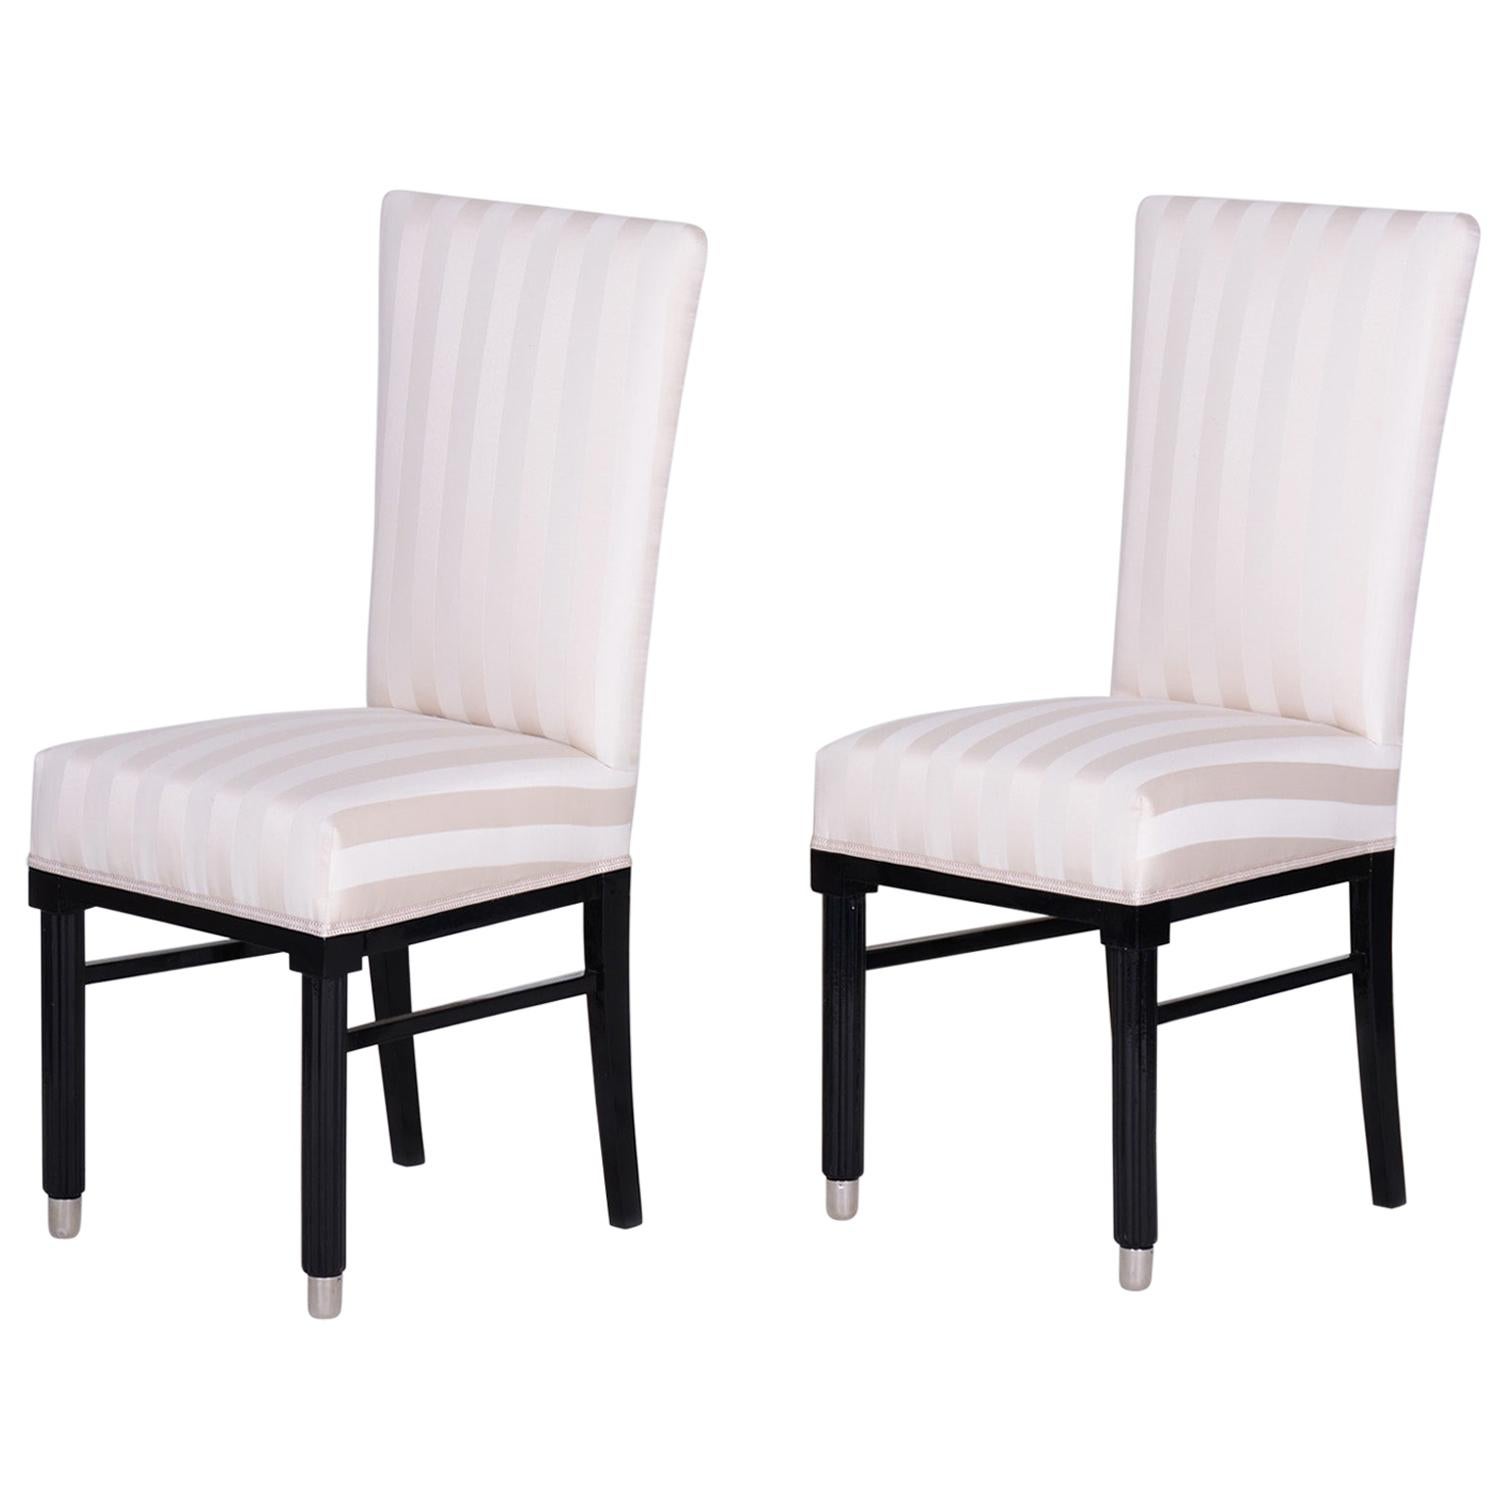 20th Century Pair of French Art Deco Chairs, Black Lacquer, New Upholstery 1920s